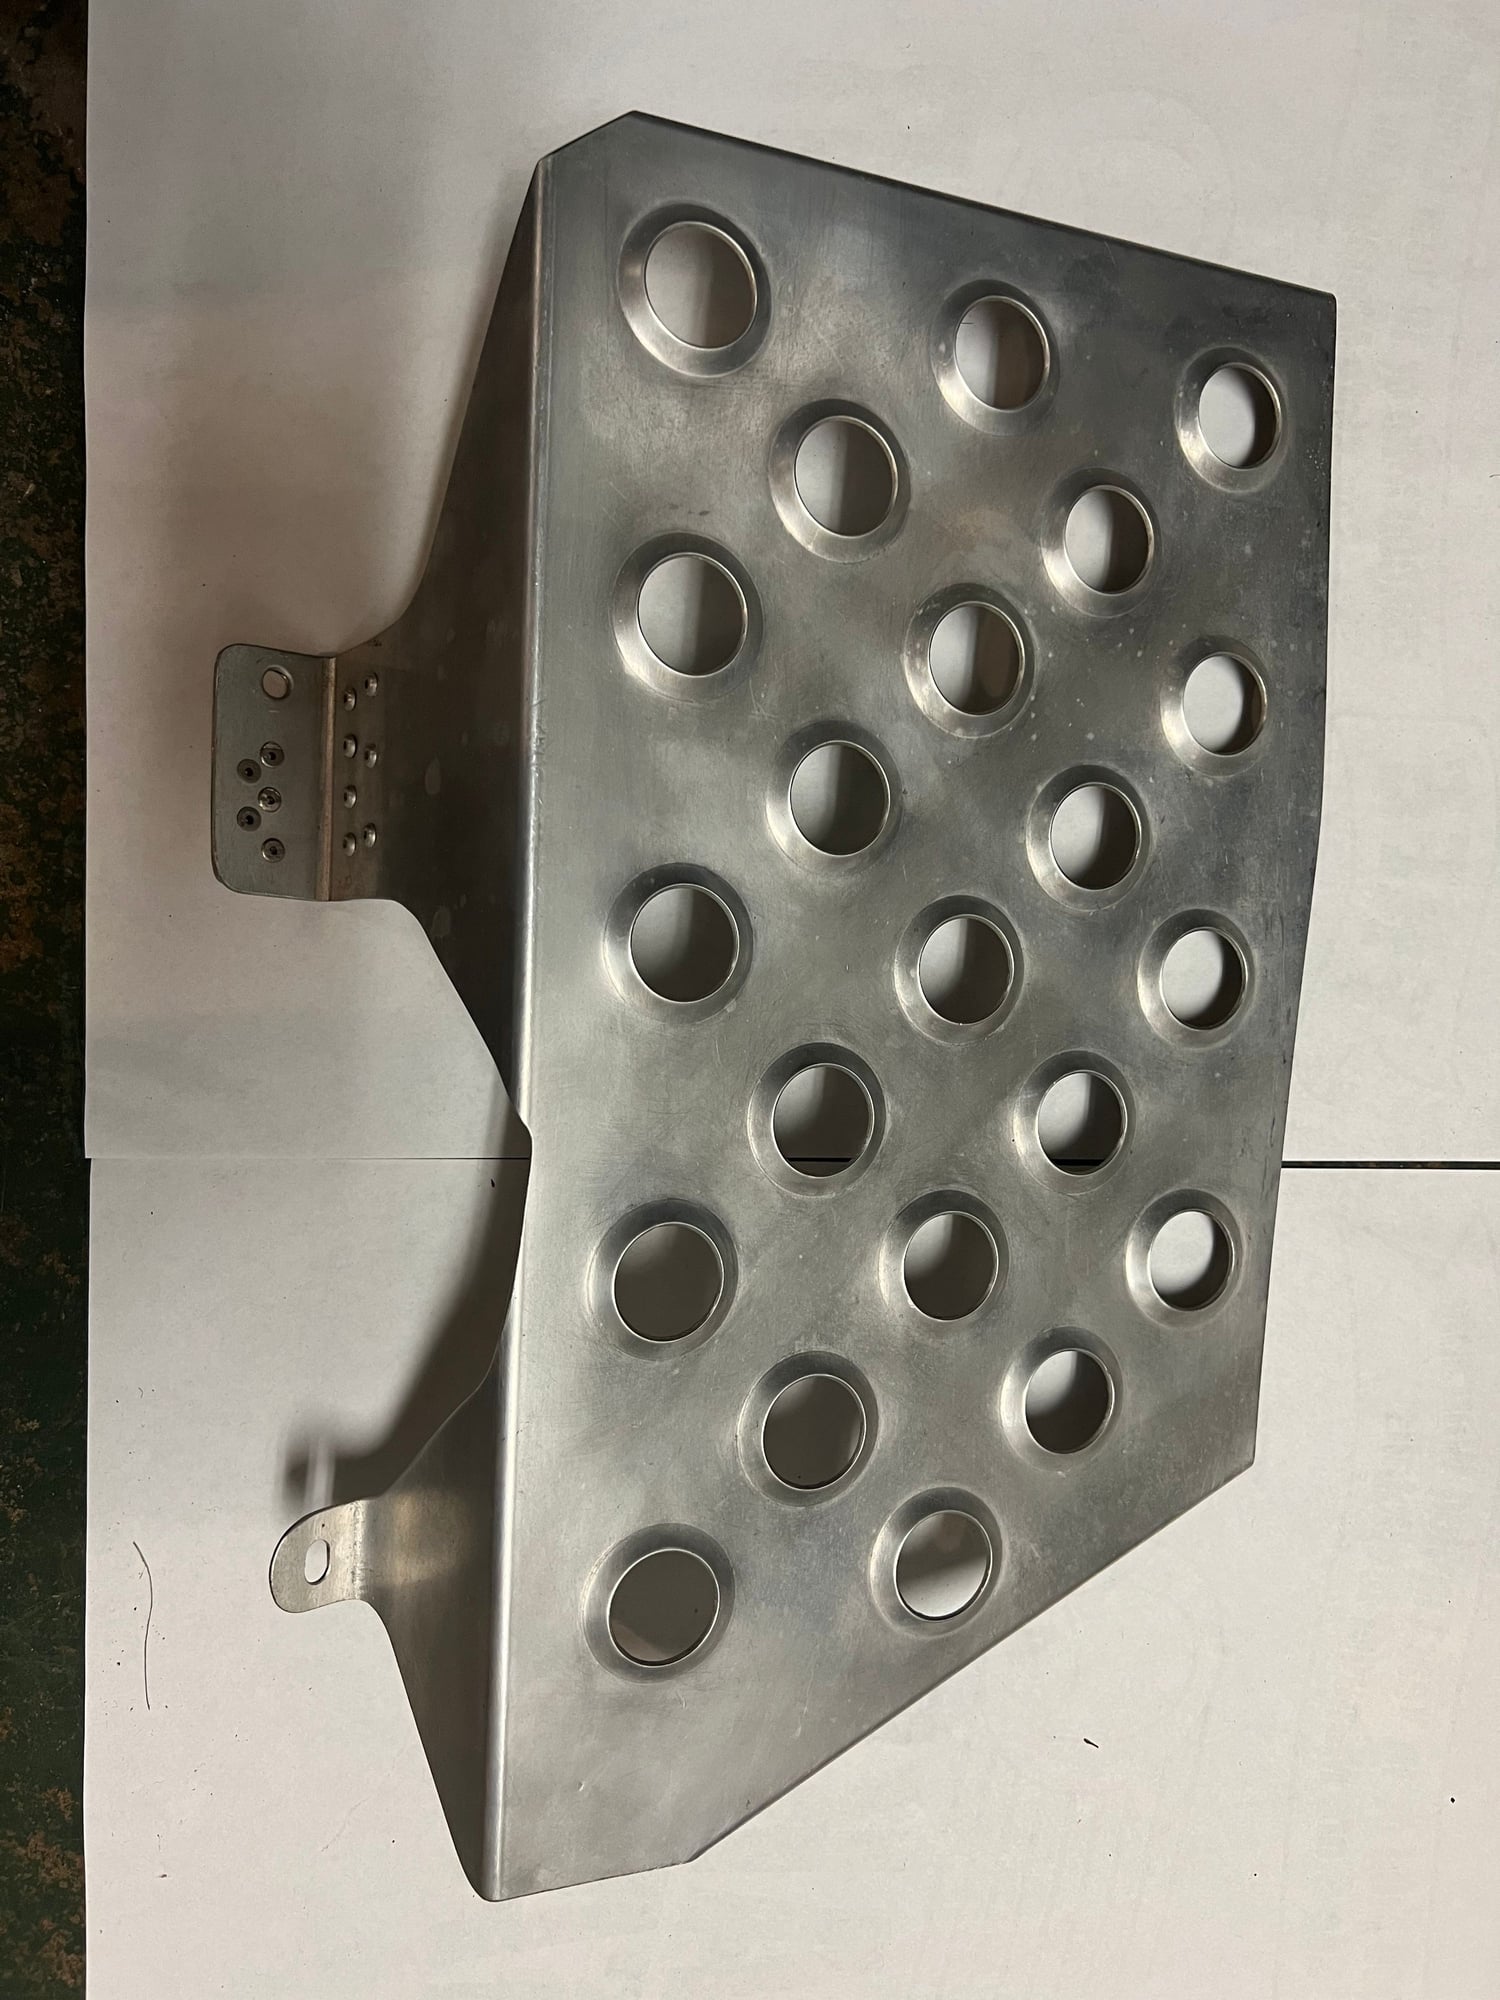 Interior/Upholstery - Moving pt. 2 : FD Aluminum Scuff Plates, RHD Foot Rest, Odyssey PC925, Misc. Interior - Used - 1993 to 2000 Mazda RX-7 - Chicago, IL 60630, United States